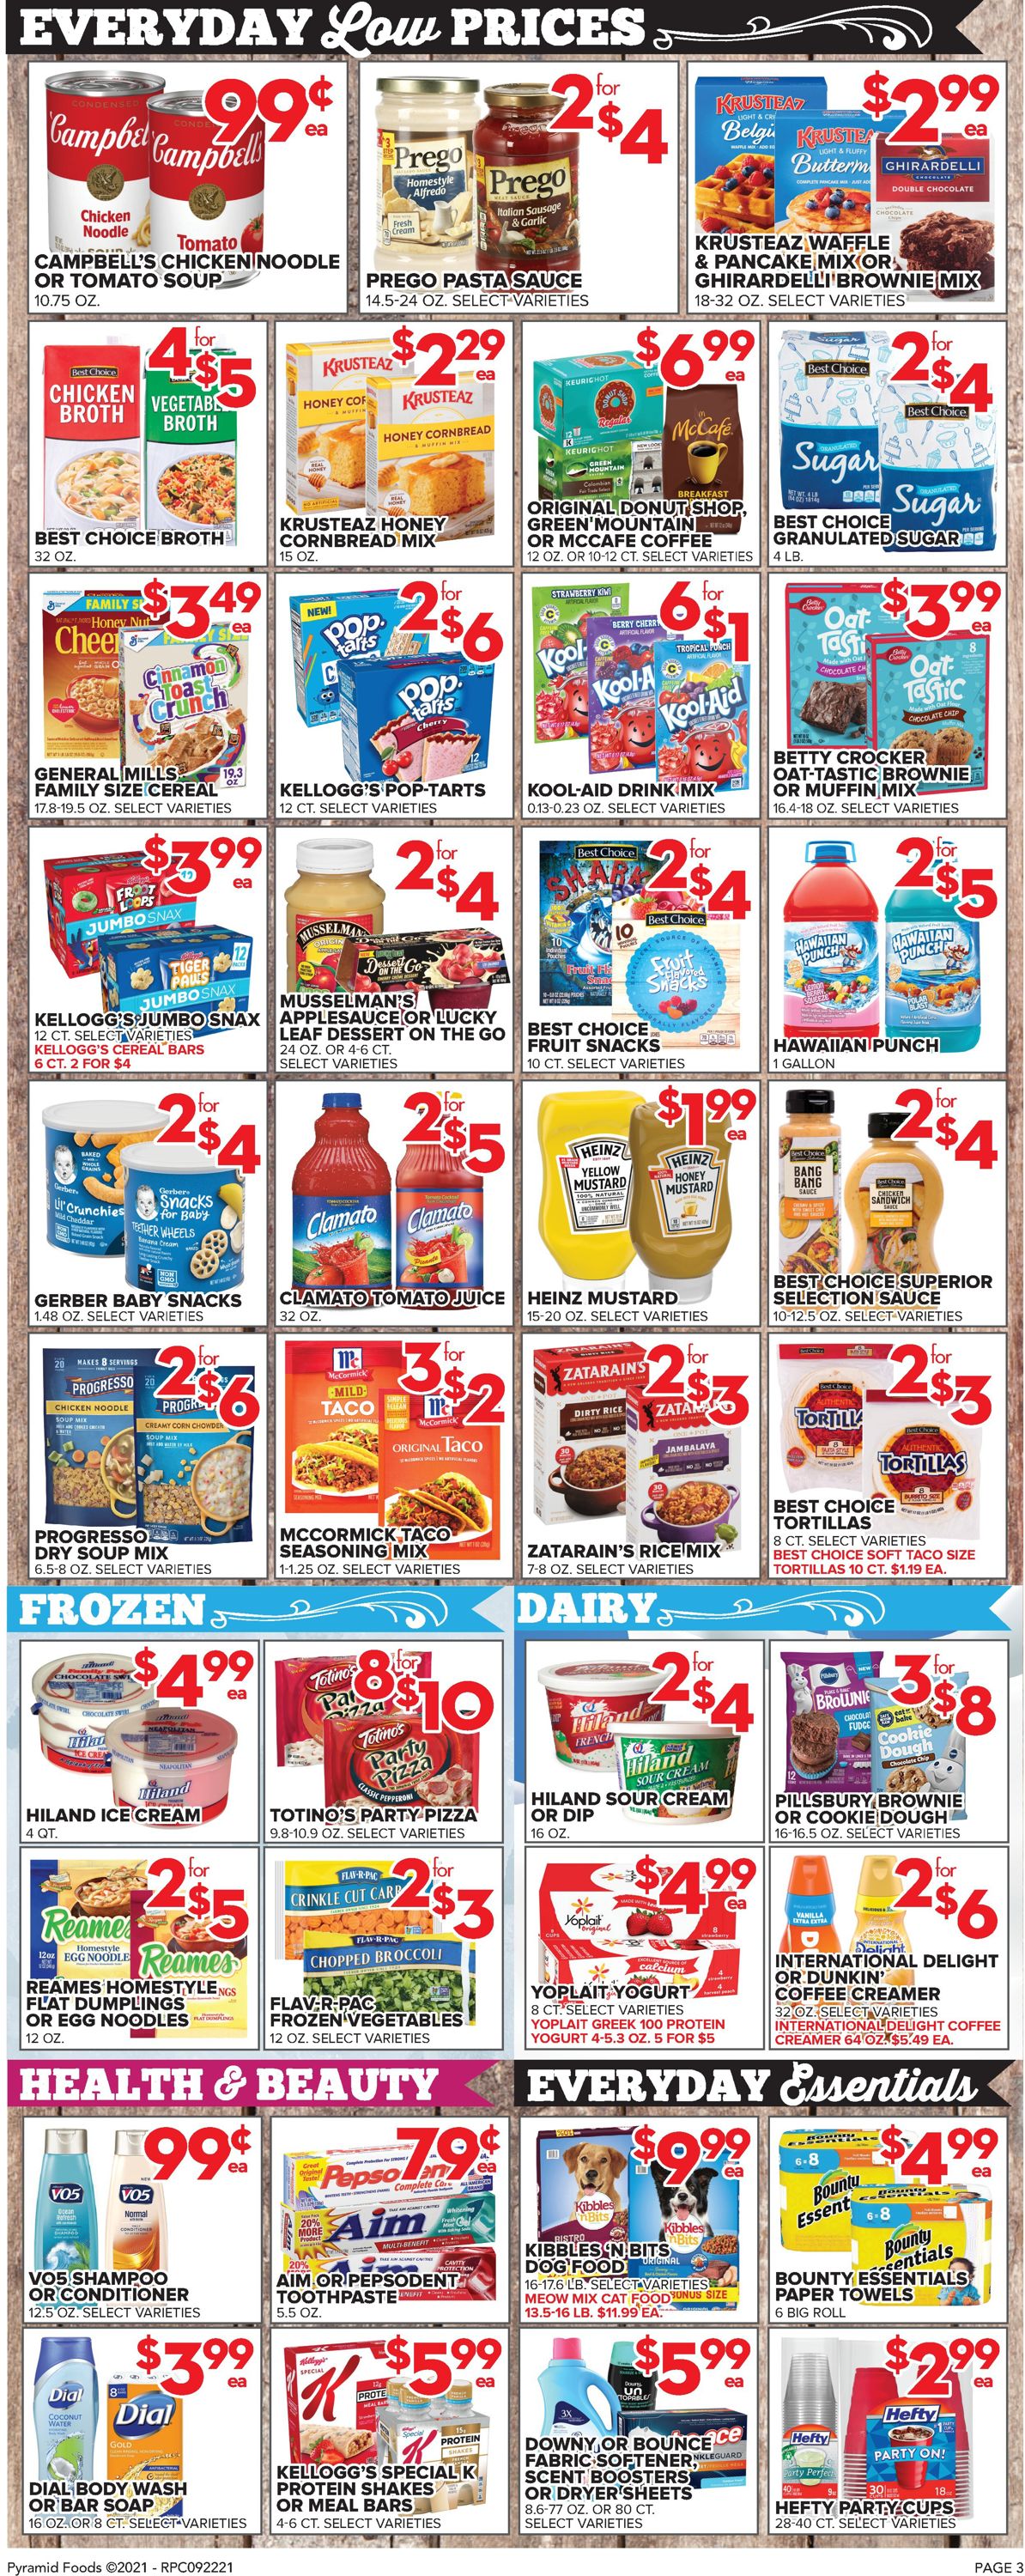 Price Cutter Weekly Ad Circular - valid 09/22-09/28/2021 (Page 3)